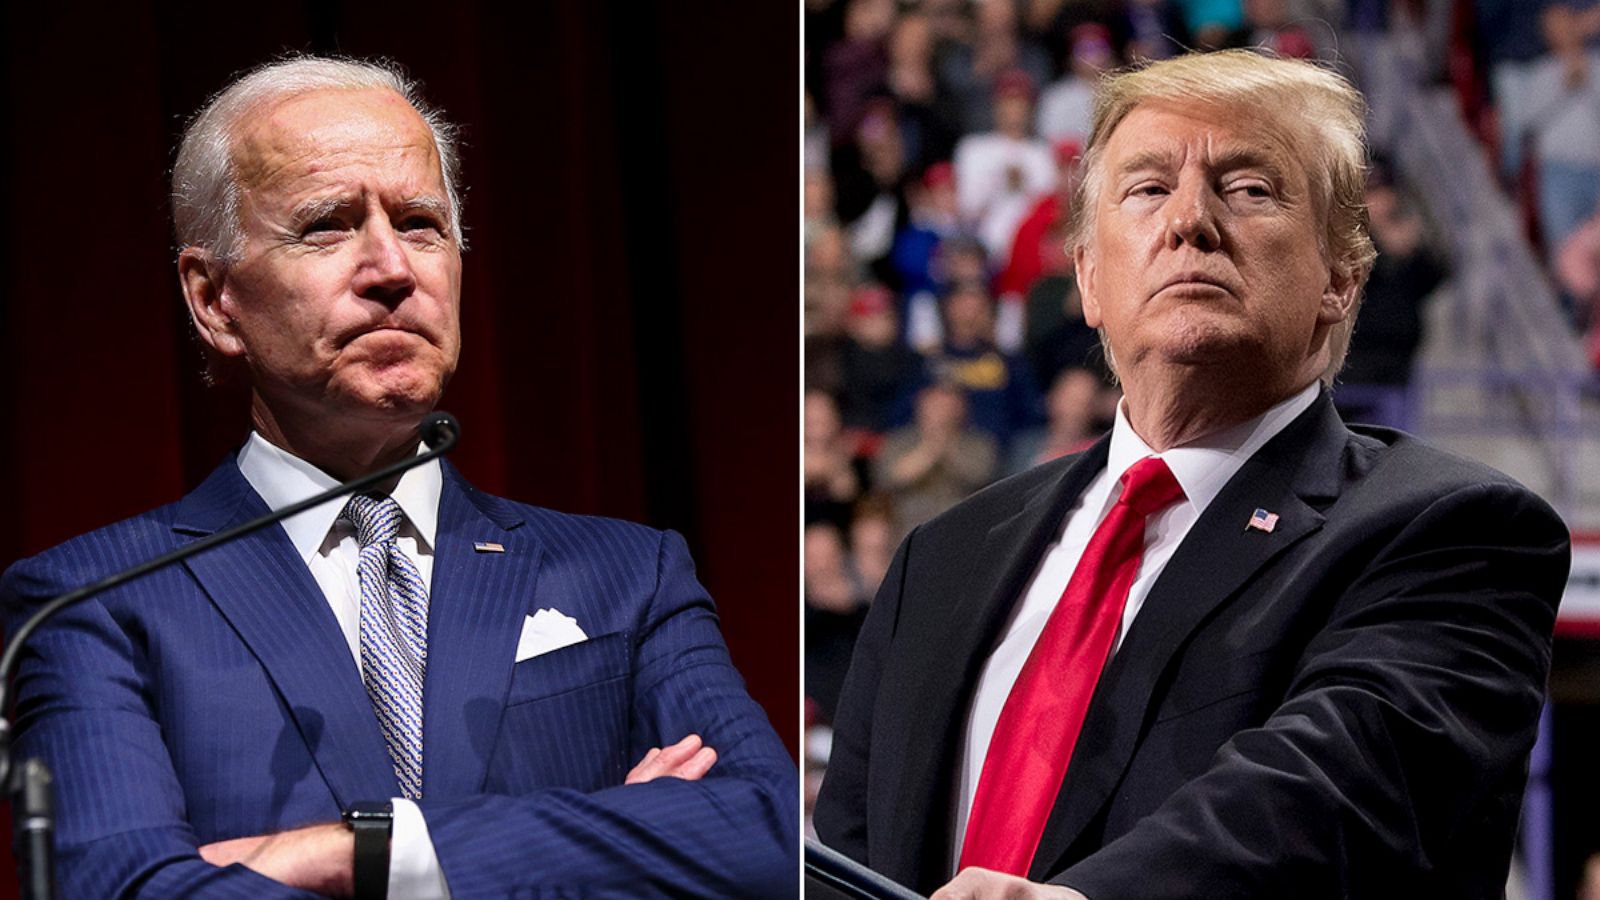 Supporters of”Make America great again”are a threat to the country: Joe Biden